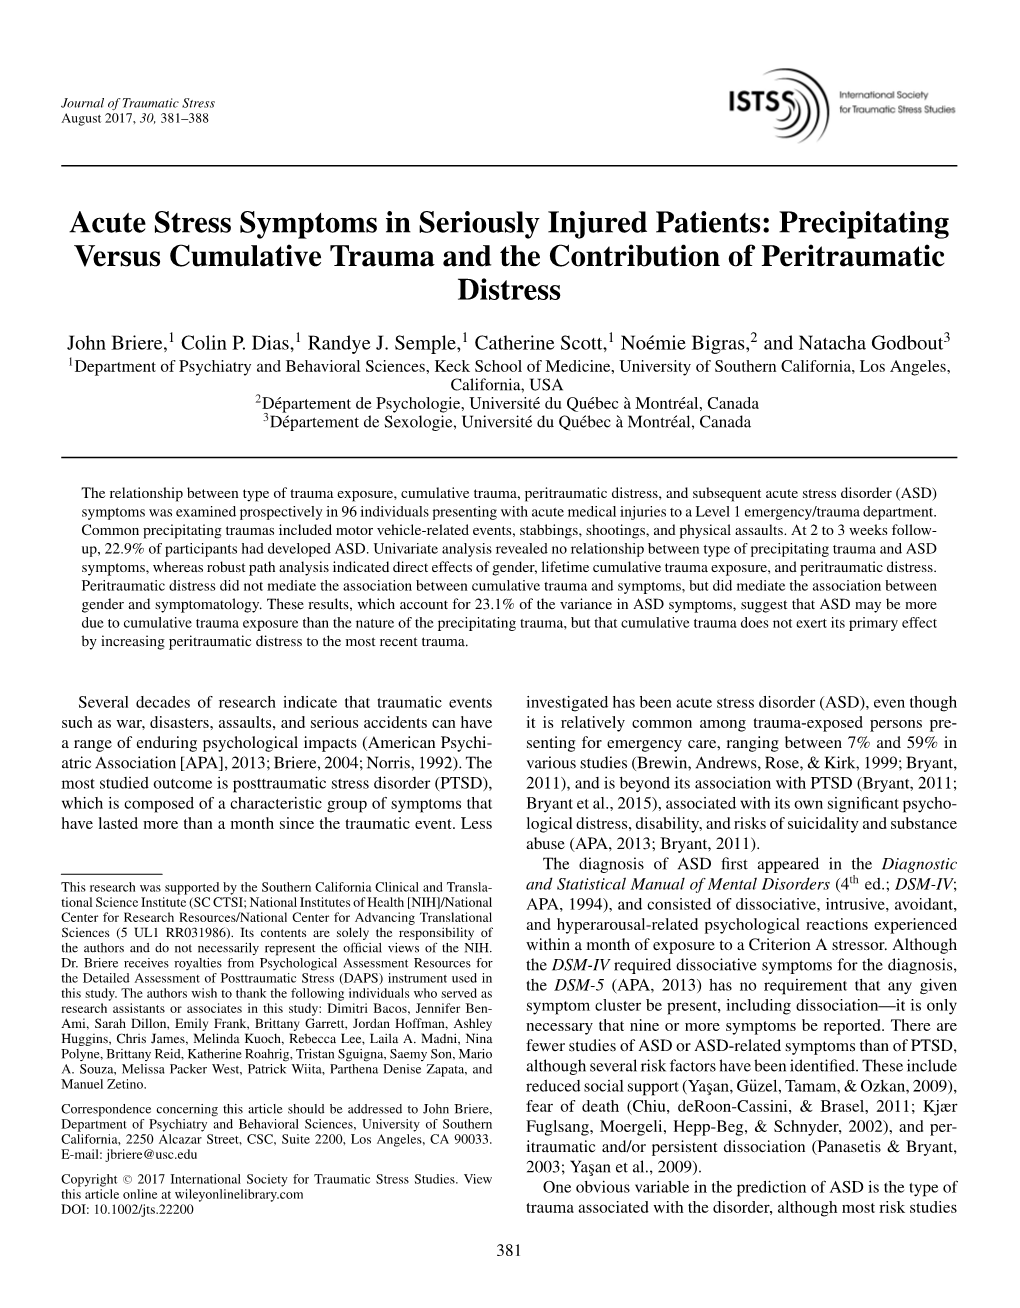 Acute Stress Symptoms in Seriously Injured Patients: Precipitating Versus Cumulative Trauma and the Contribution of Peritraumatic Distress